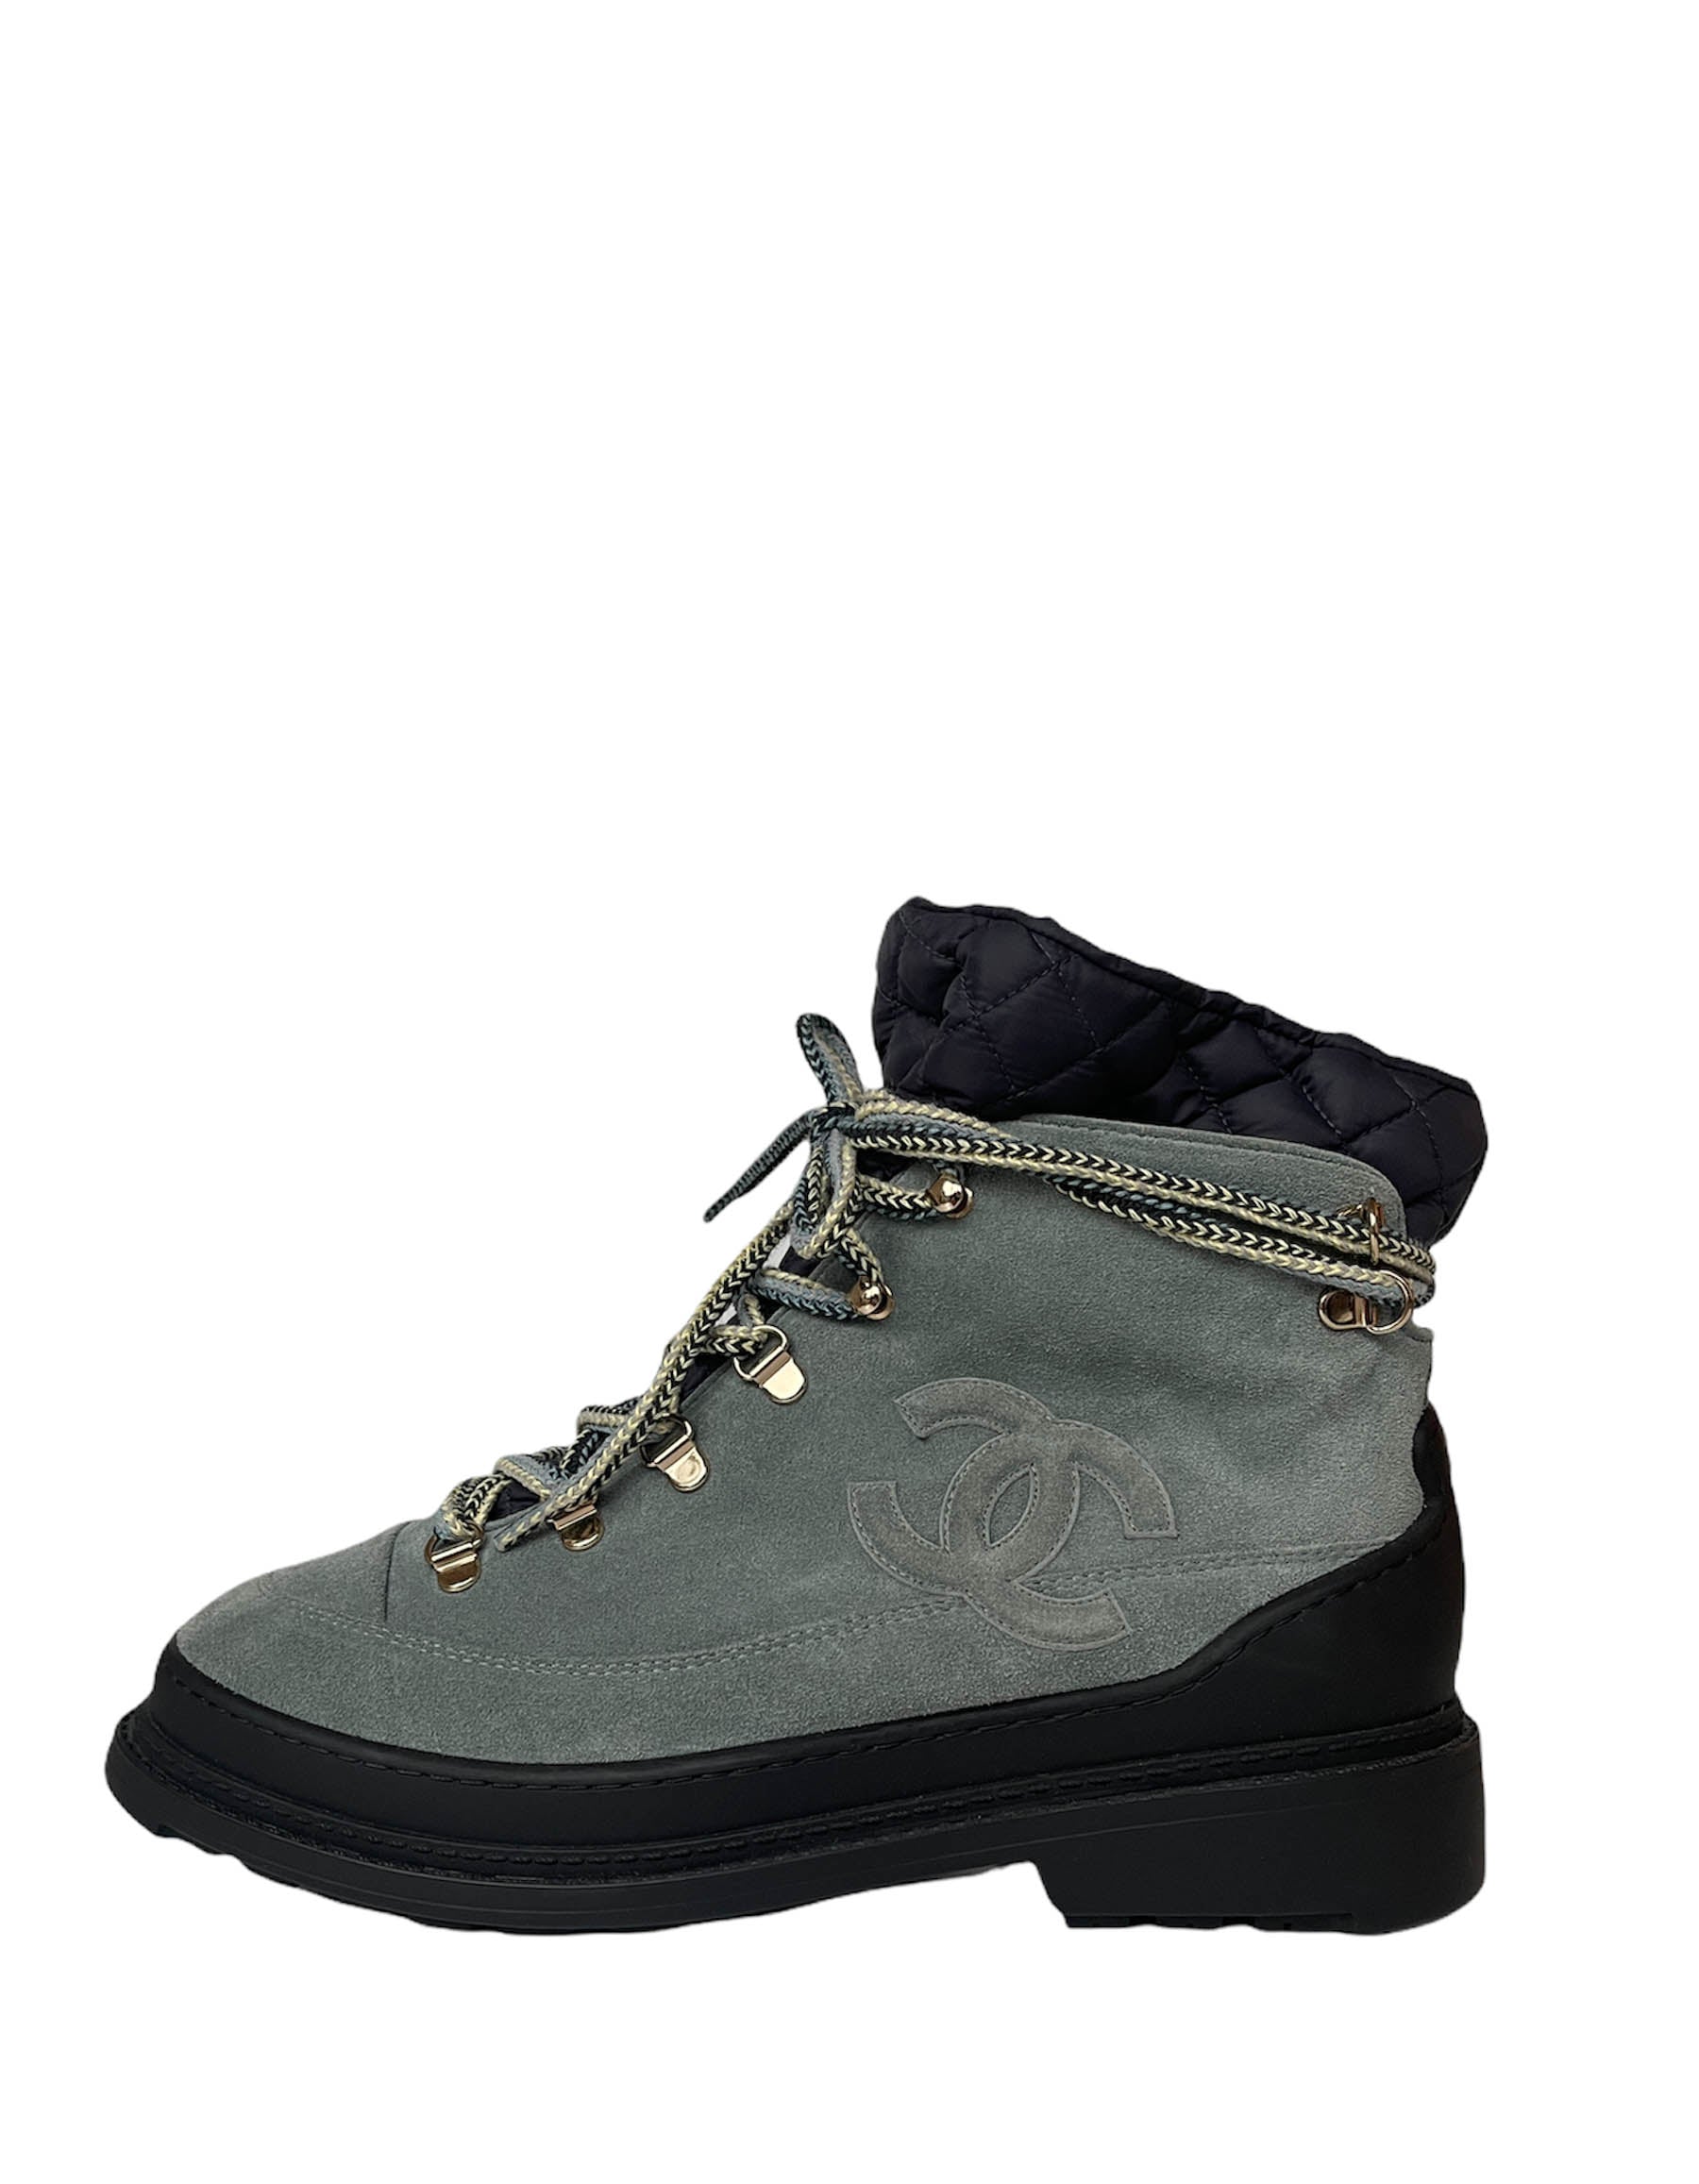 Chanel NEW Slate Blue Suede Logo Lace Up Boots sz 40